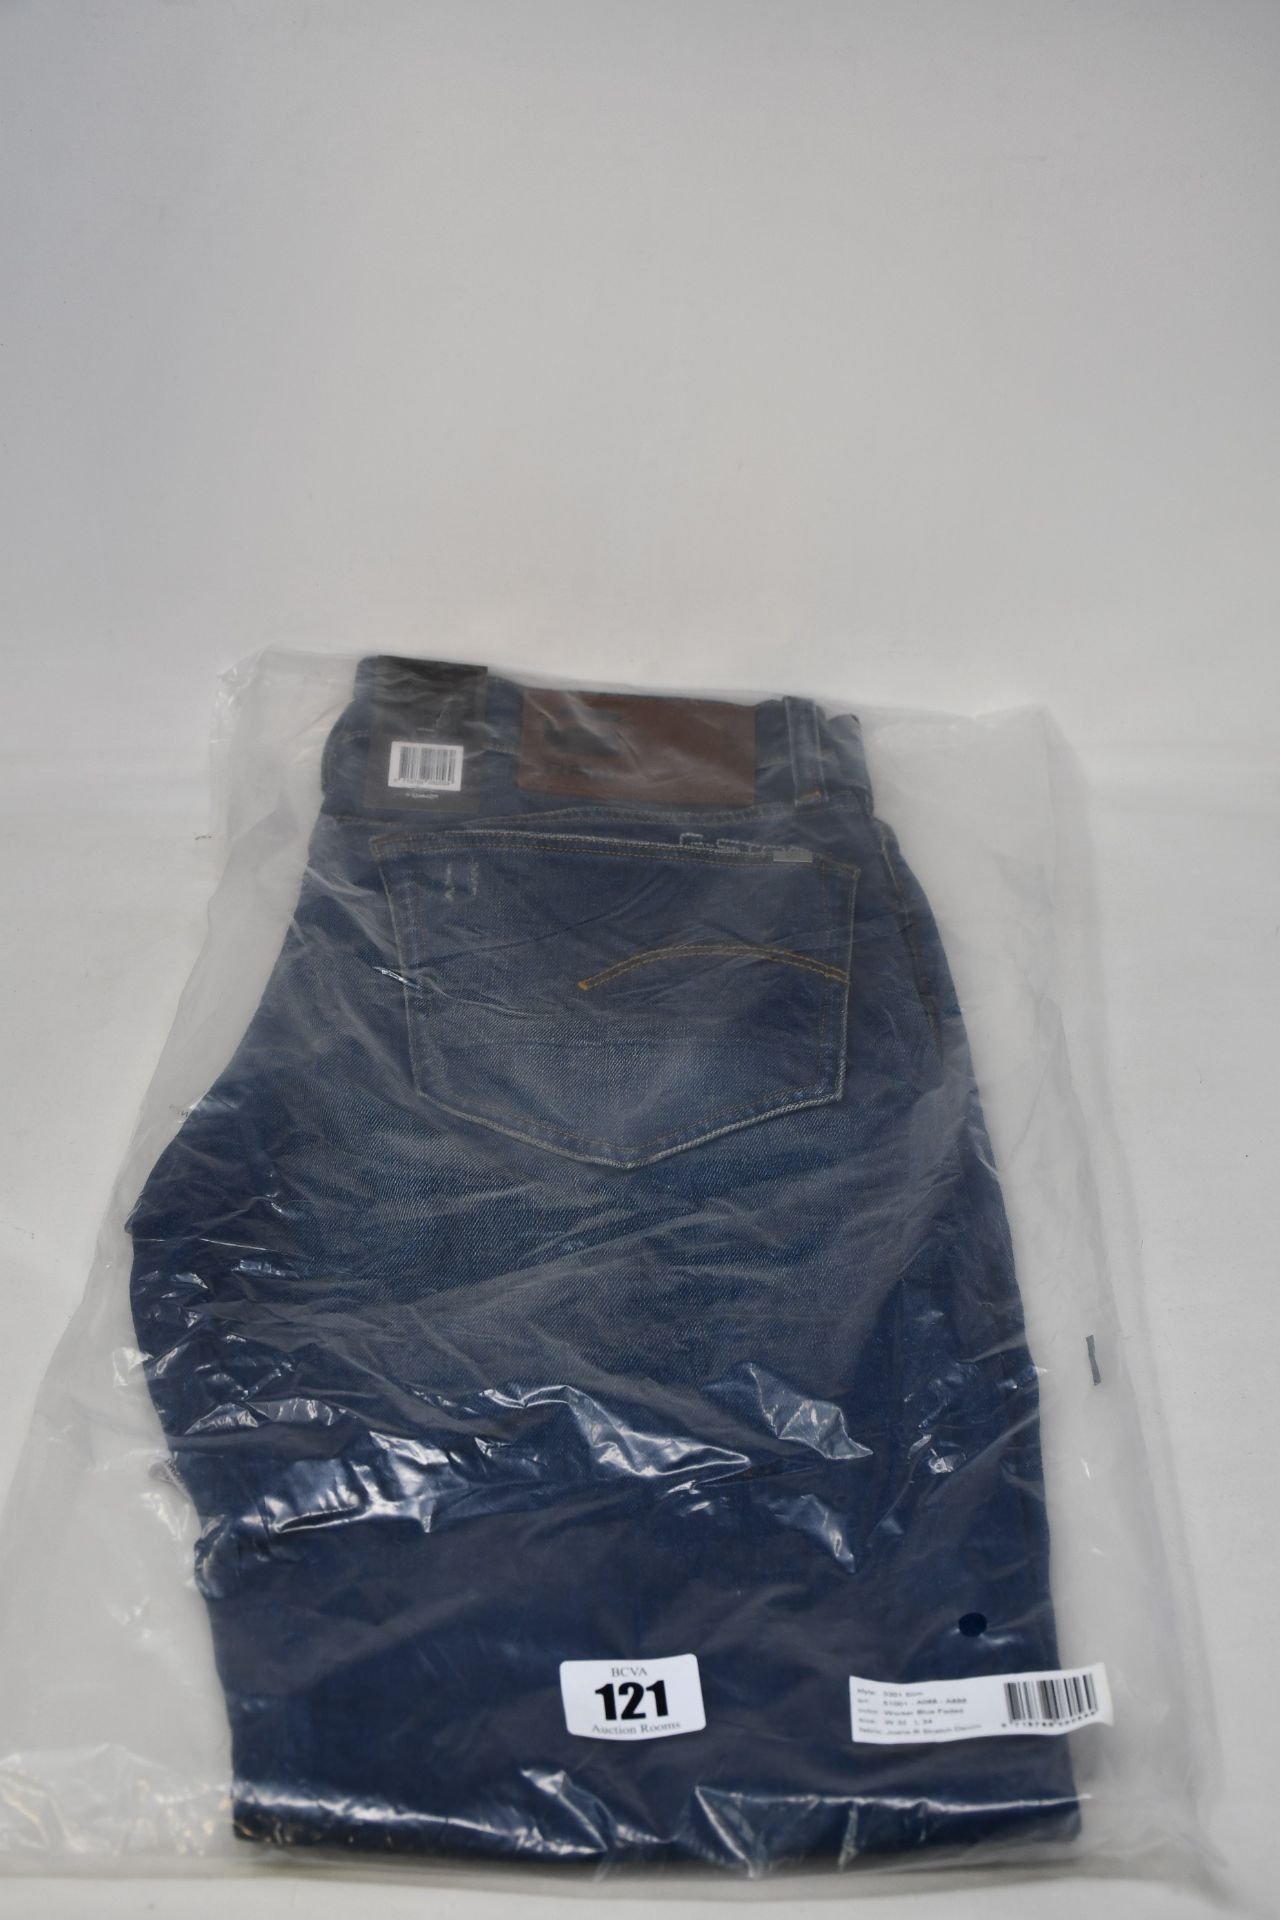 Four pairs of as new G-Star Raw jeans (All W32, L 2 x 30, 2 x 34).